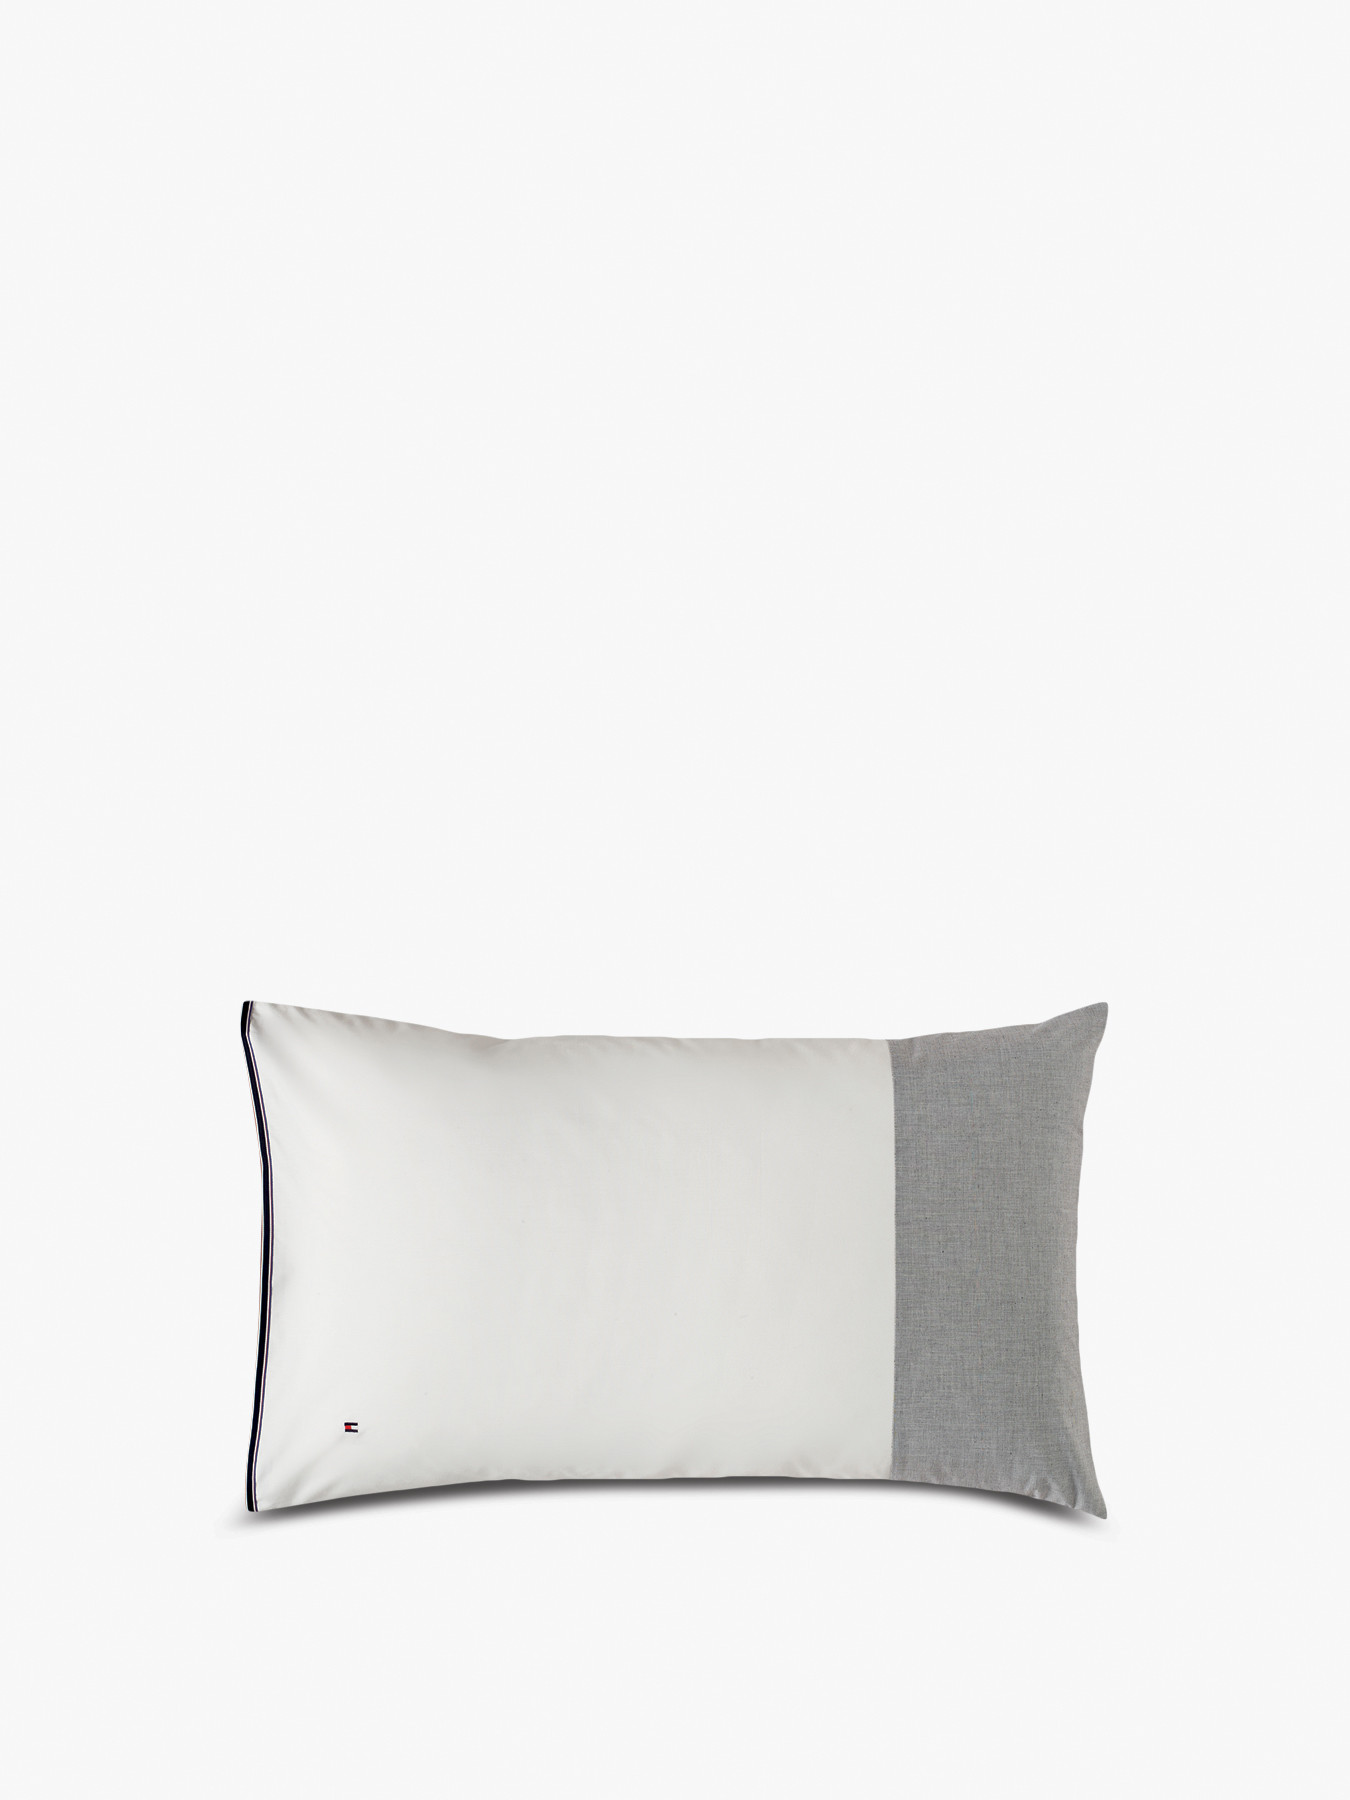 Tommy Hilfiger Tailor 2 Standard Pillowcase Grey Pillowcases